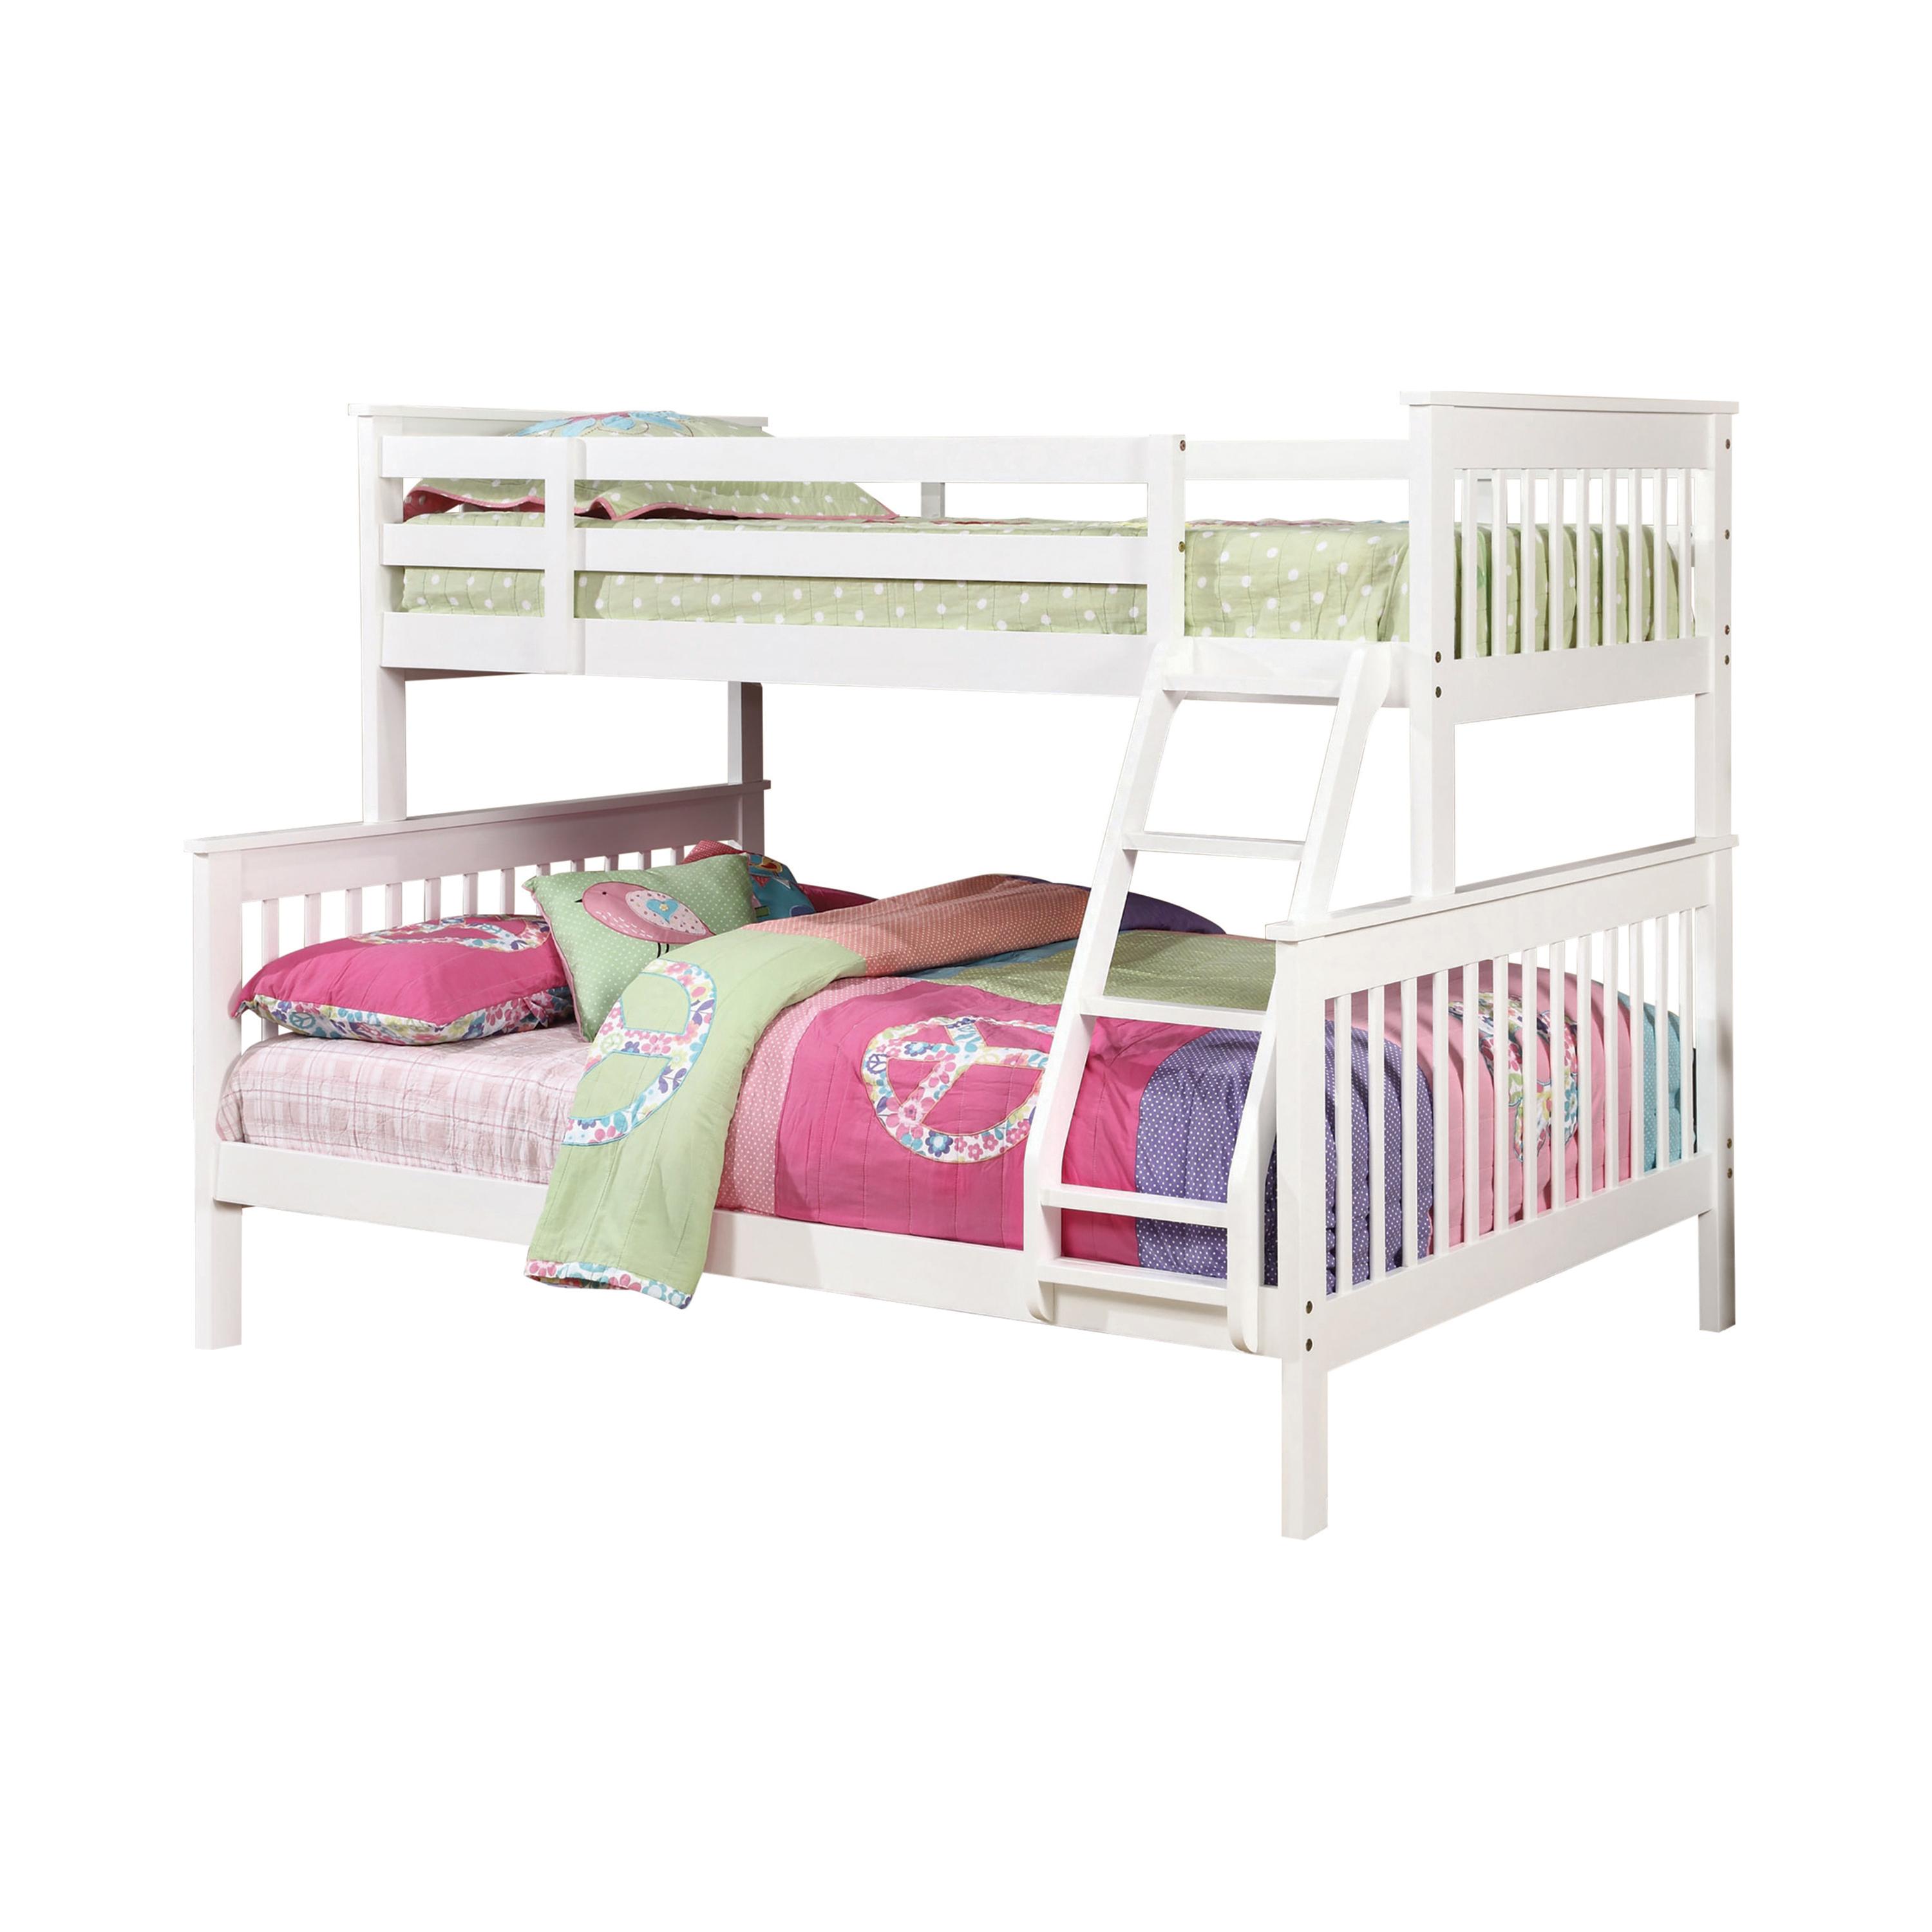 Contemporary Bunk Bed 460260 Chapman 460260 in White 